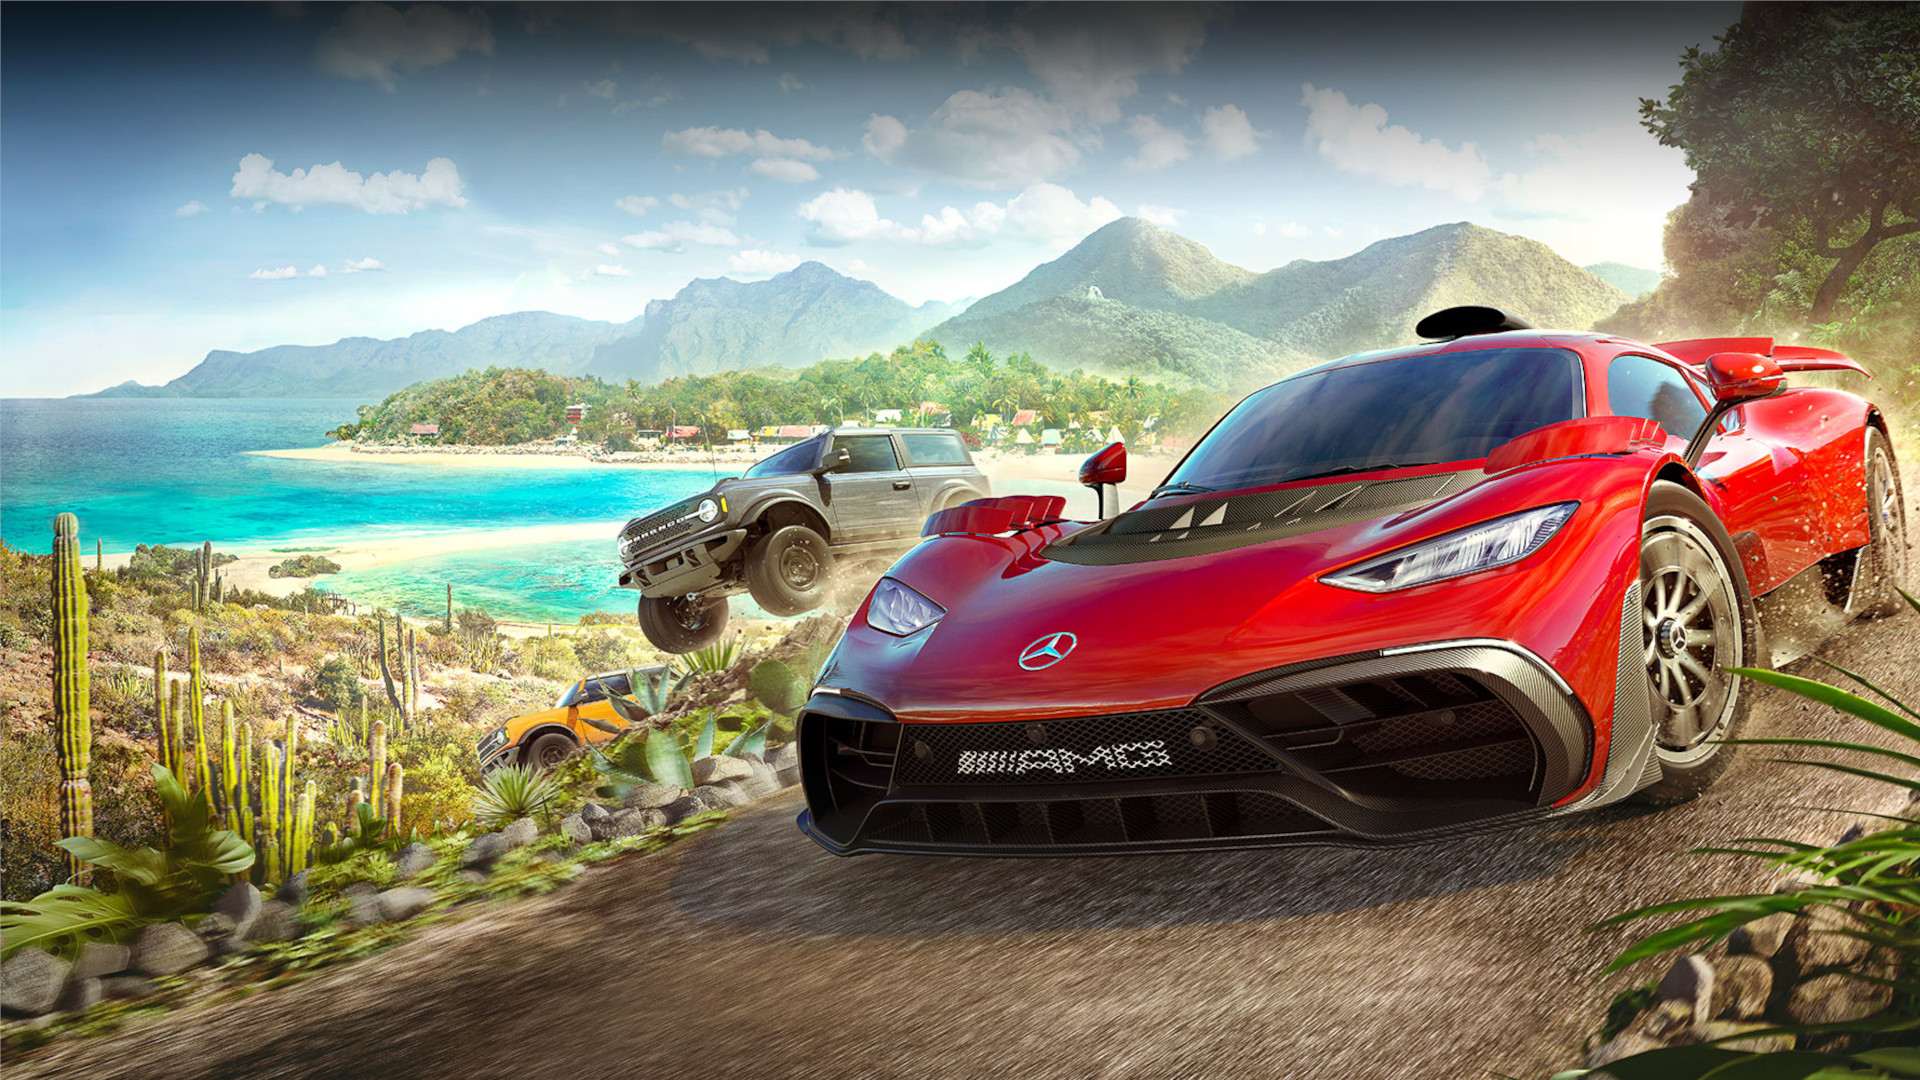 Forza Horizon 5 PC specs and requirements